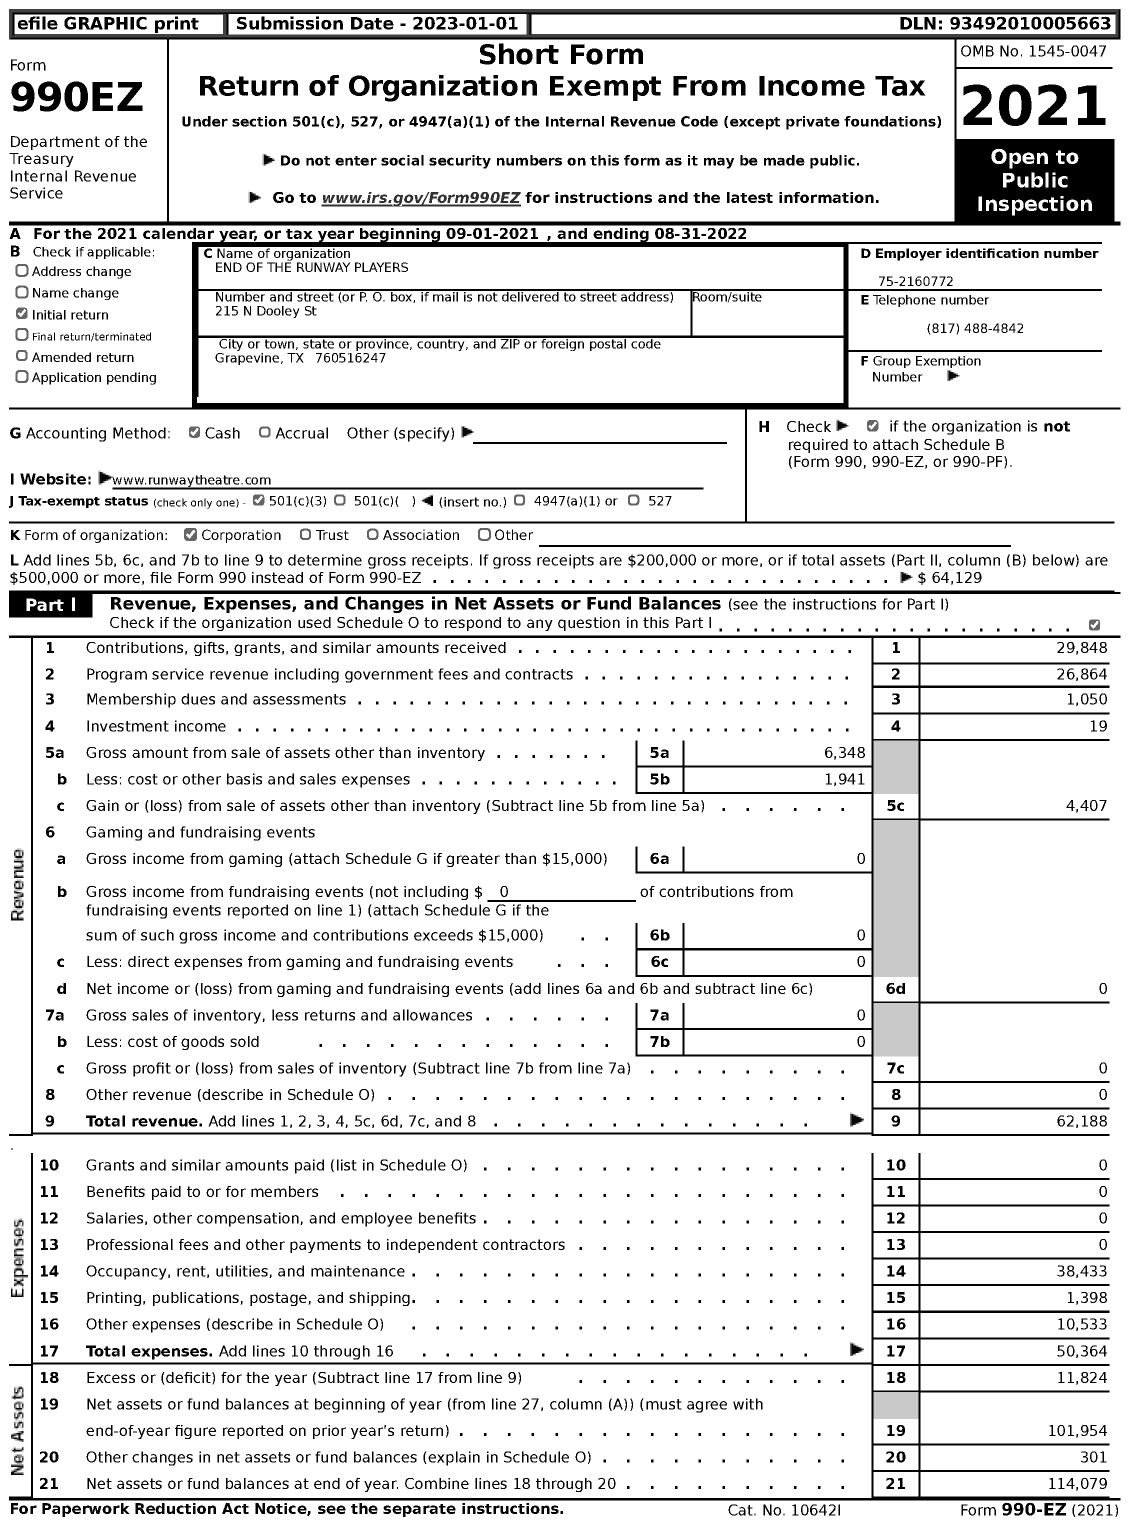 Image of first page of 2021 Form 990EZ for End of the Runway Players